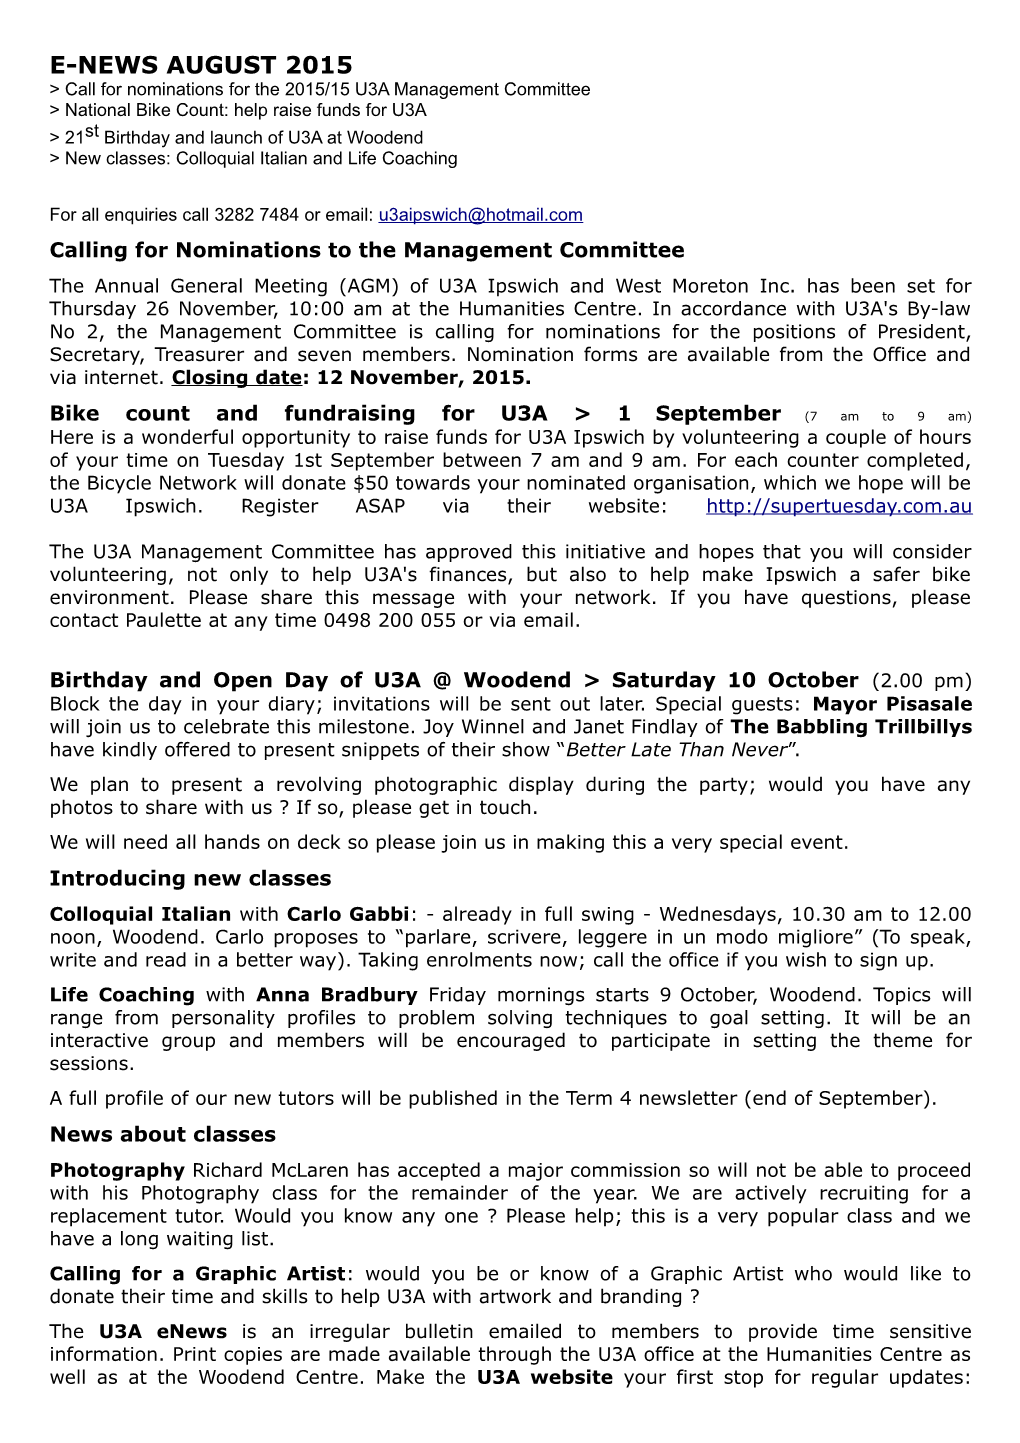 Calling for Nominations to the Management Committee